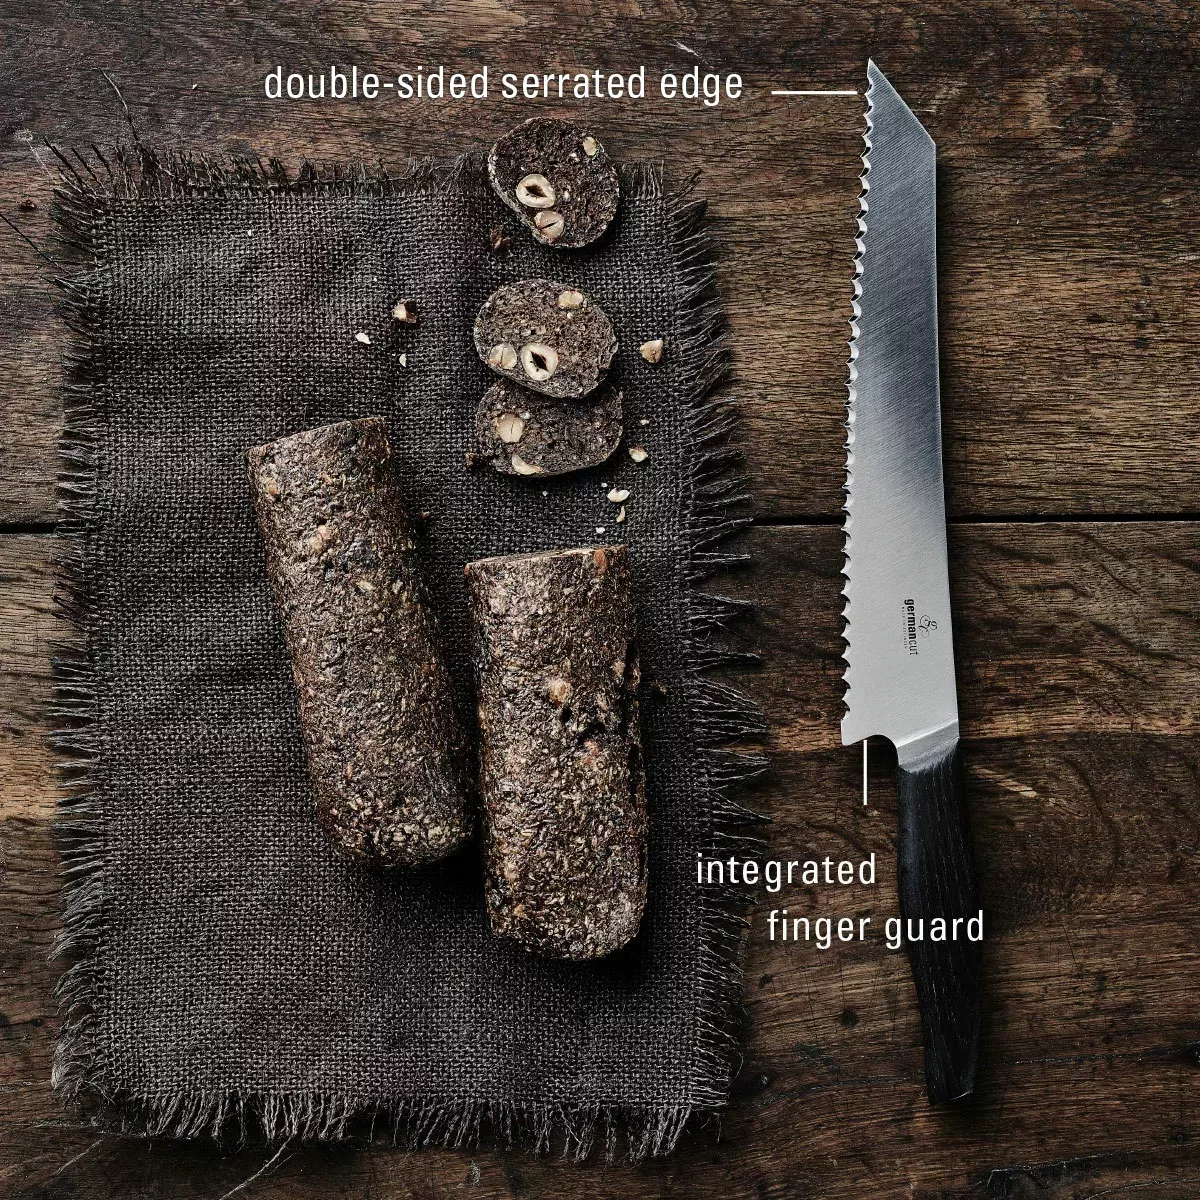 Breadlover double-sided serrated edge